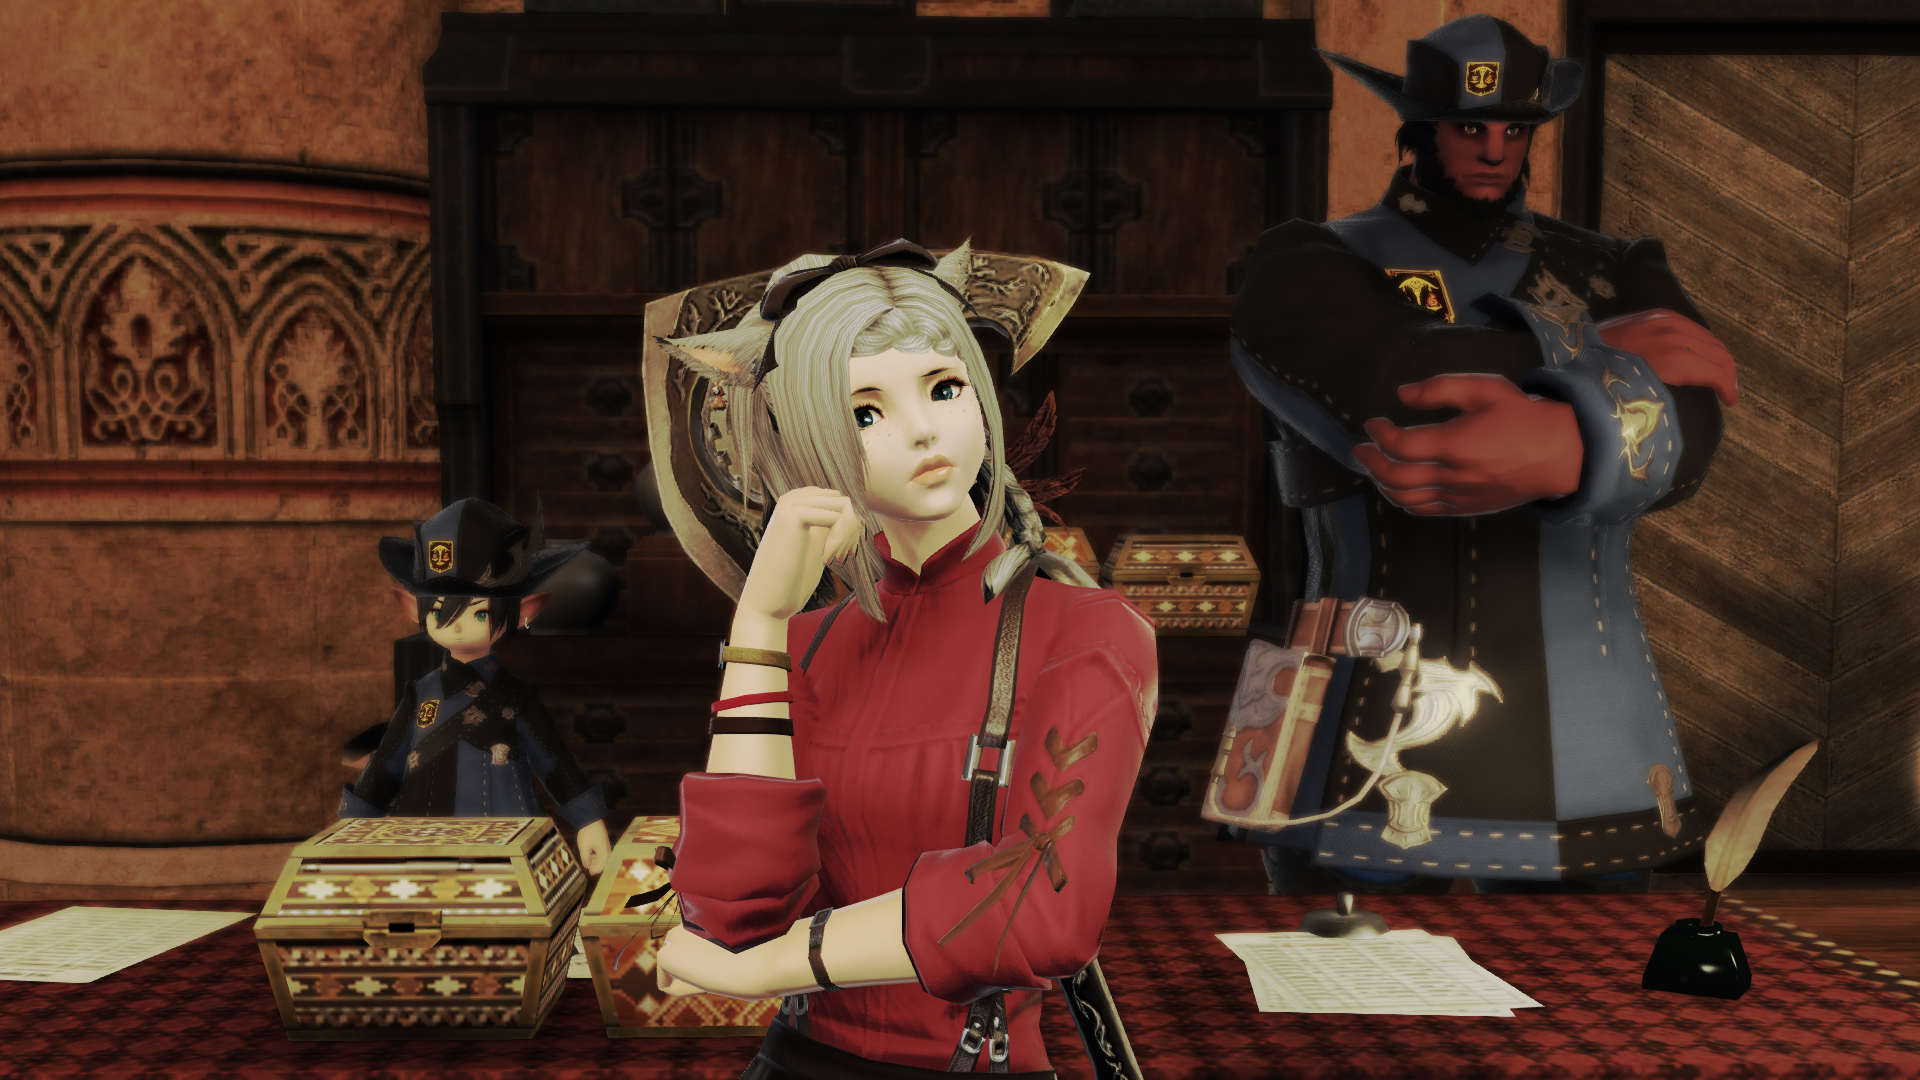 Gatherers Level up Guide 1-90 and Make Gil in FINAL FANTASY XIV